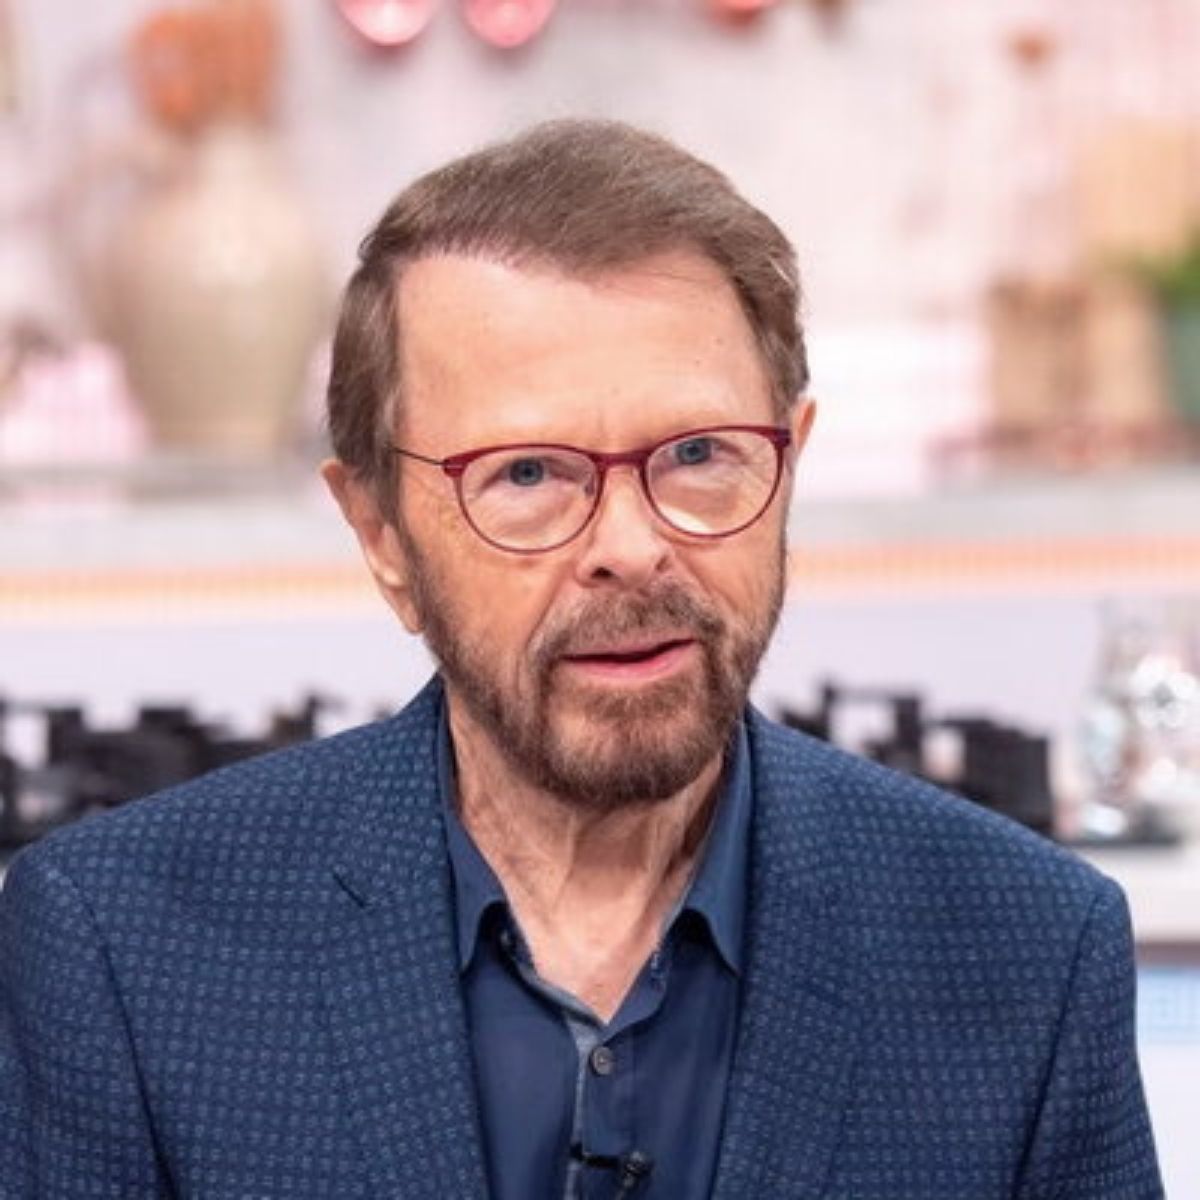 Björn Ulvaeus, member of the band ABBA